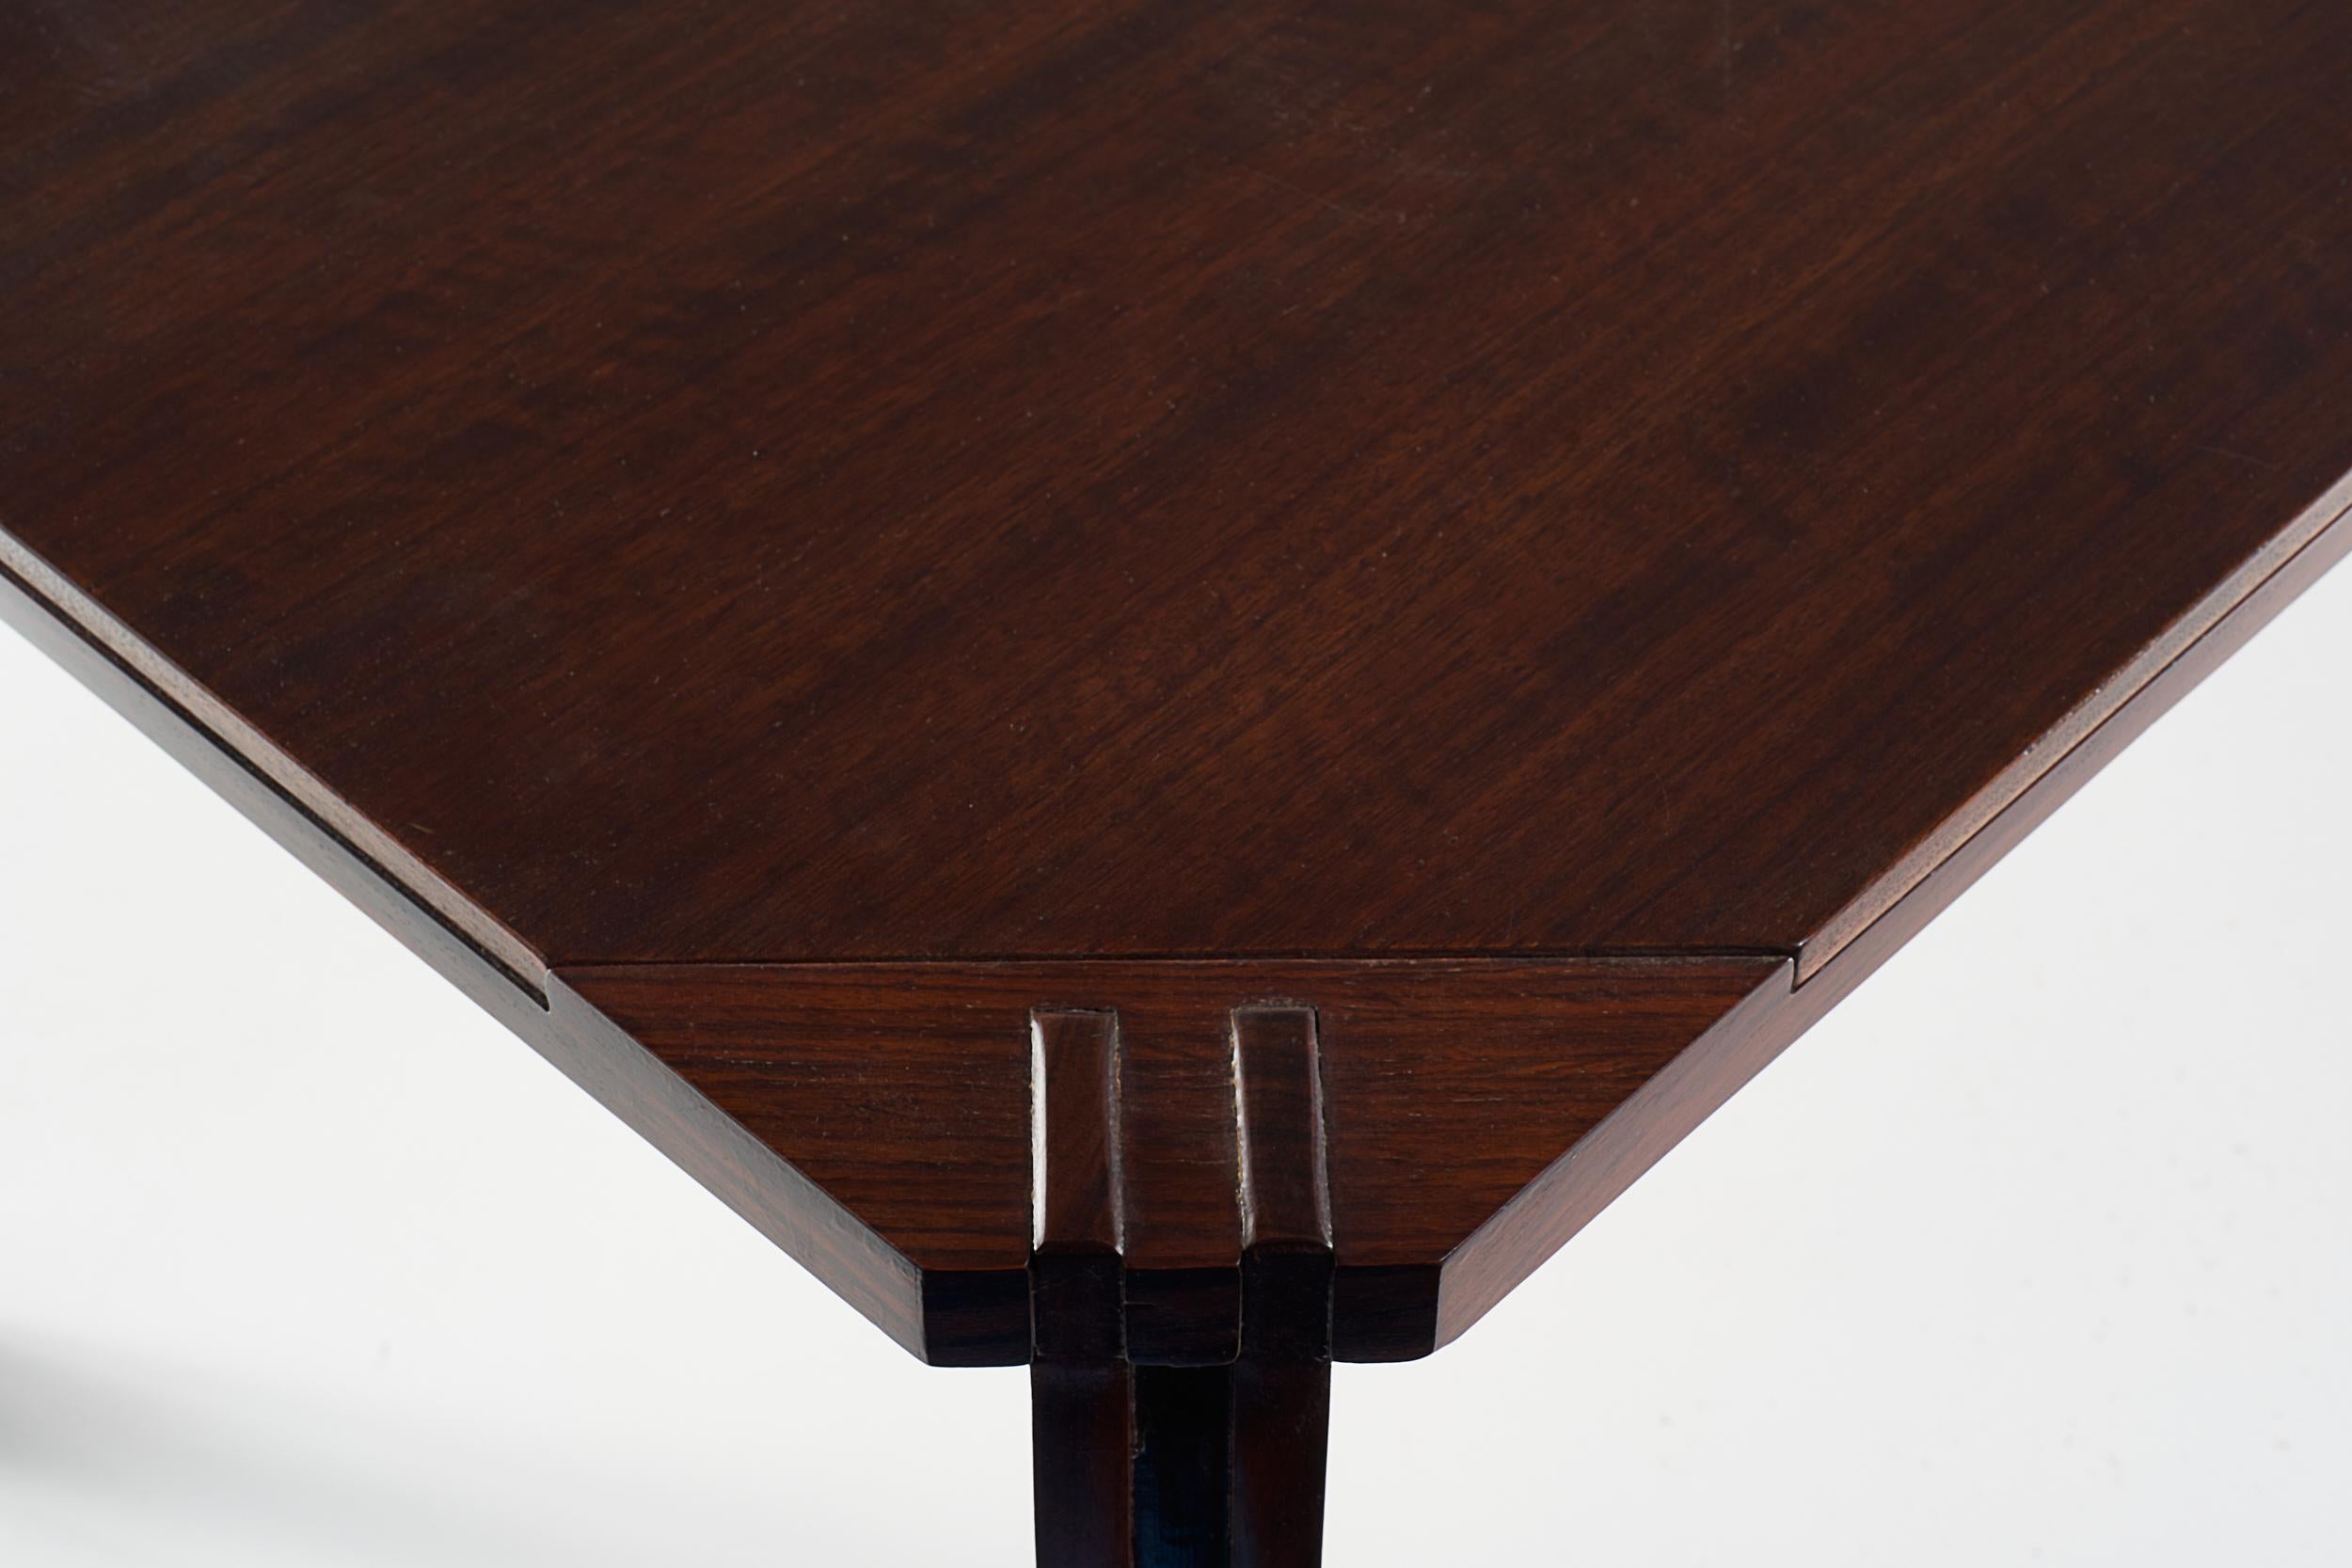 20th Century Ico Parisi Table with Straight Walnut Frame and Wooden Supports, circa 1950